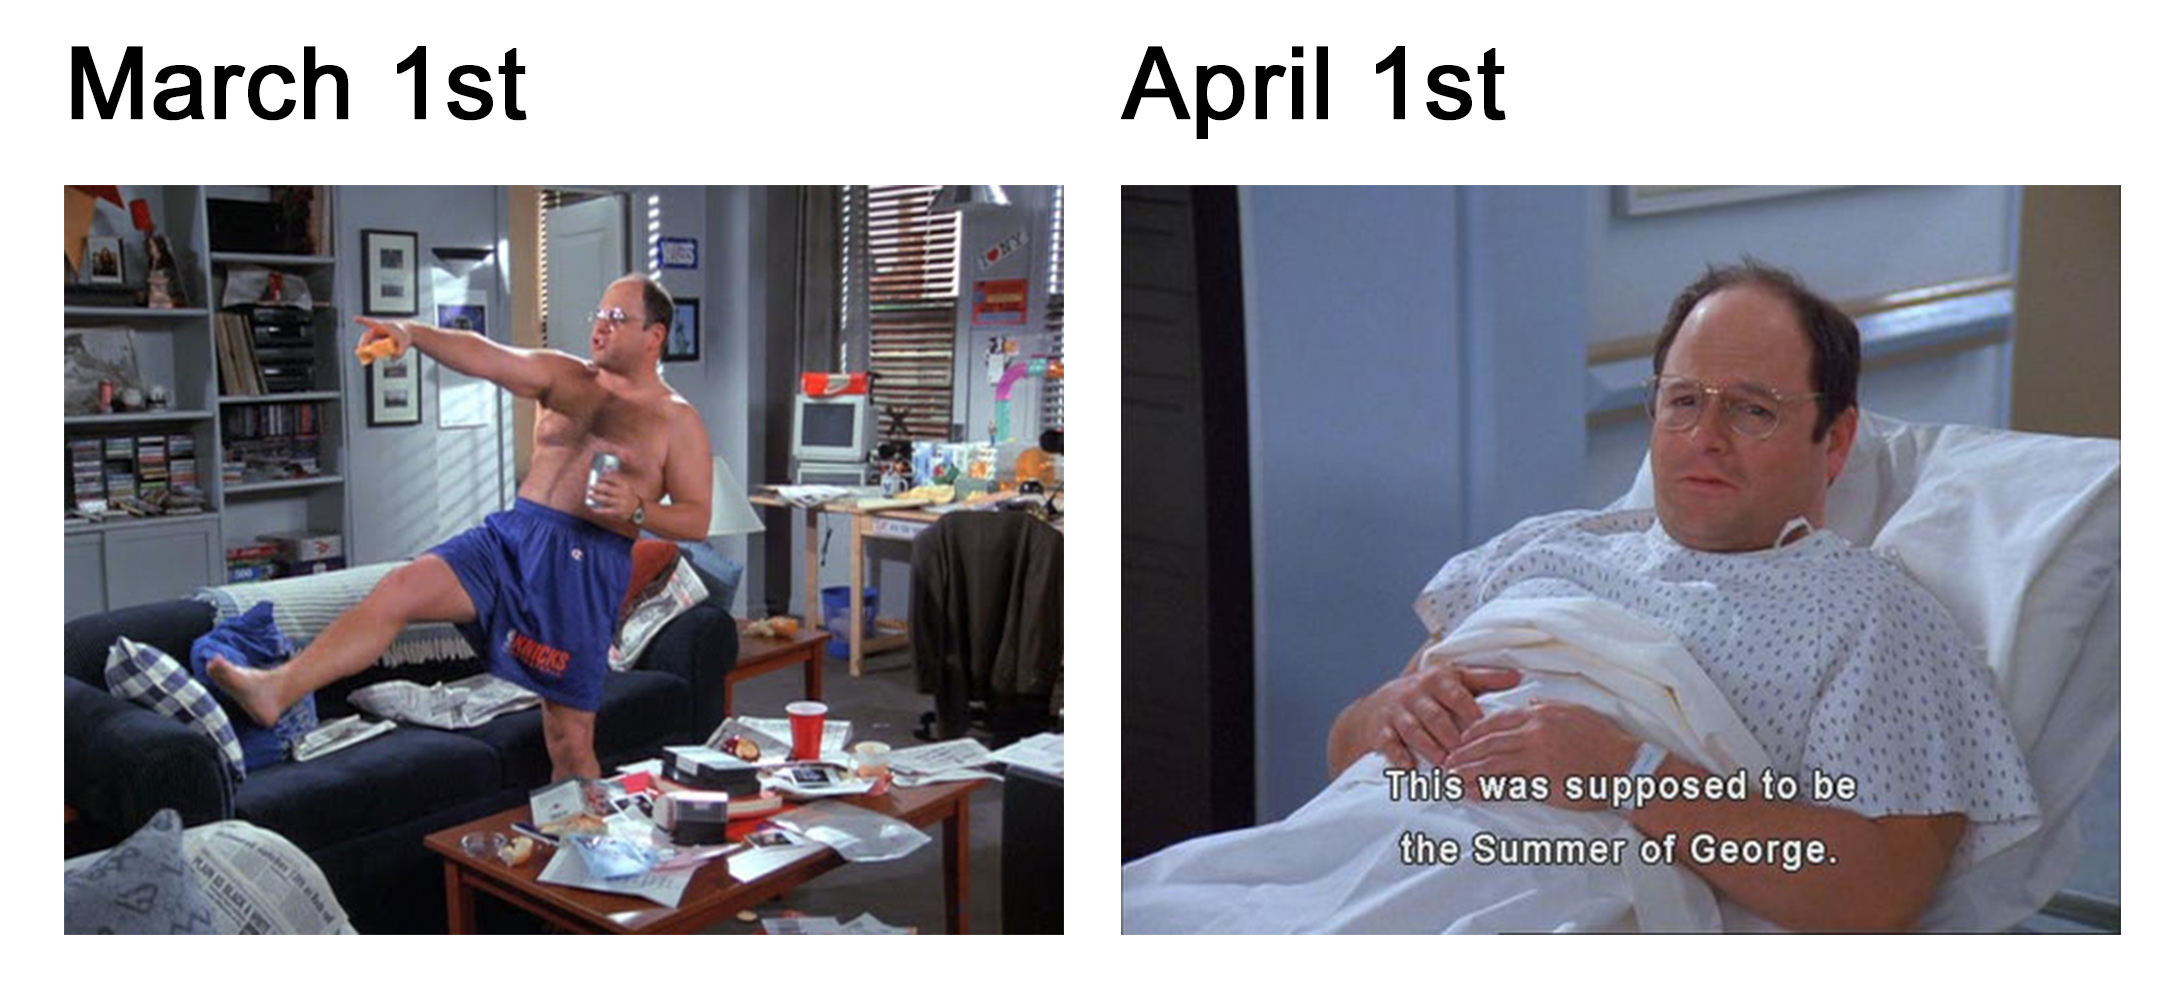 March 1st April 1st - George Costanza seinfeld - This was supposed to be the Summer of George.